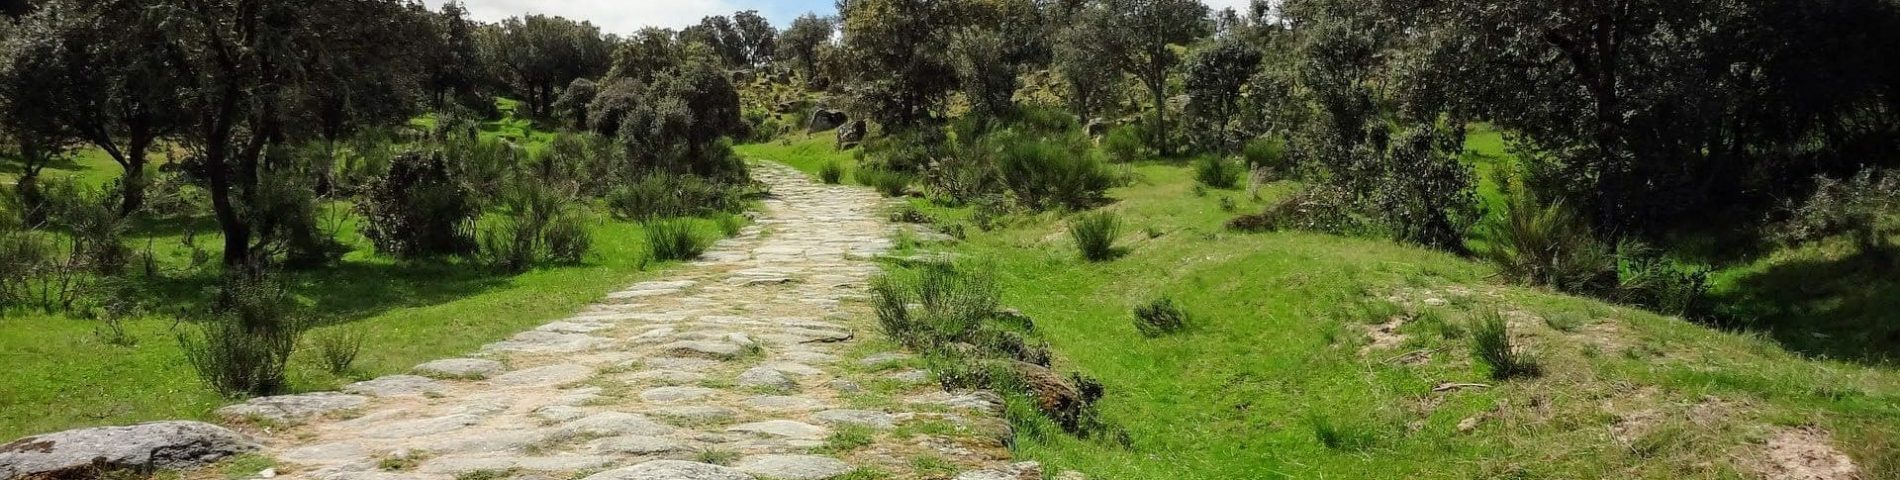 Image of a Roman road with stone and grass